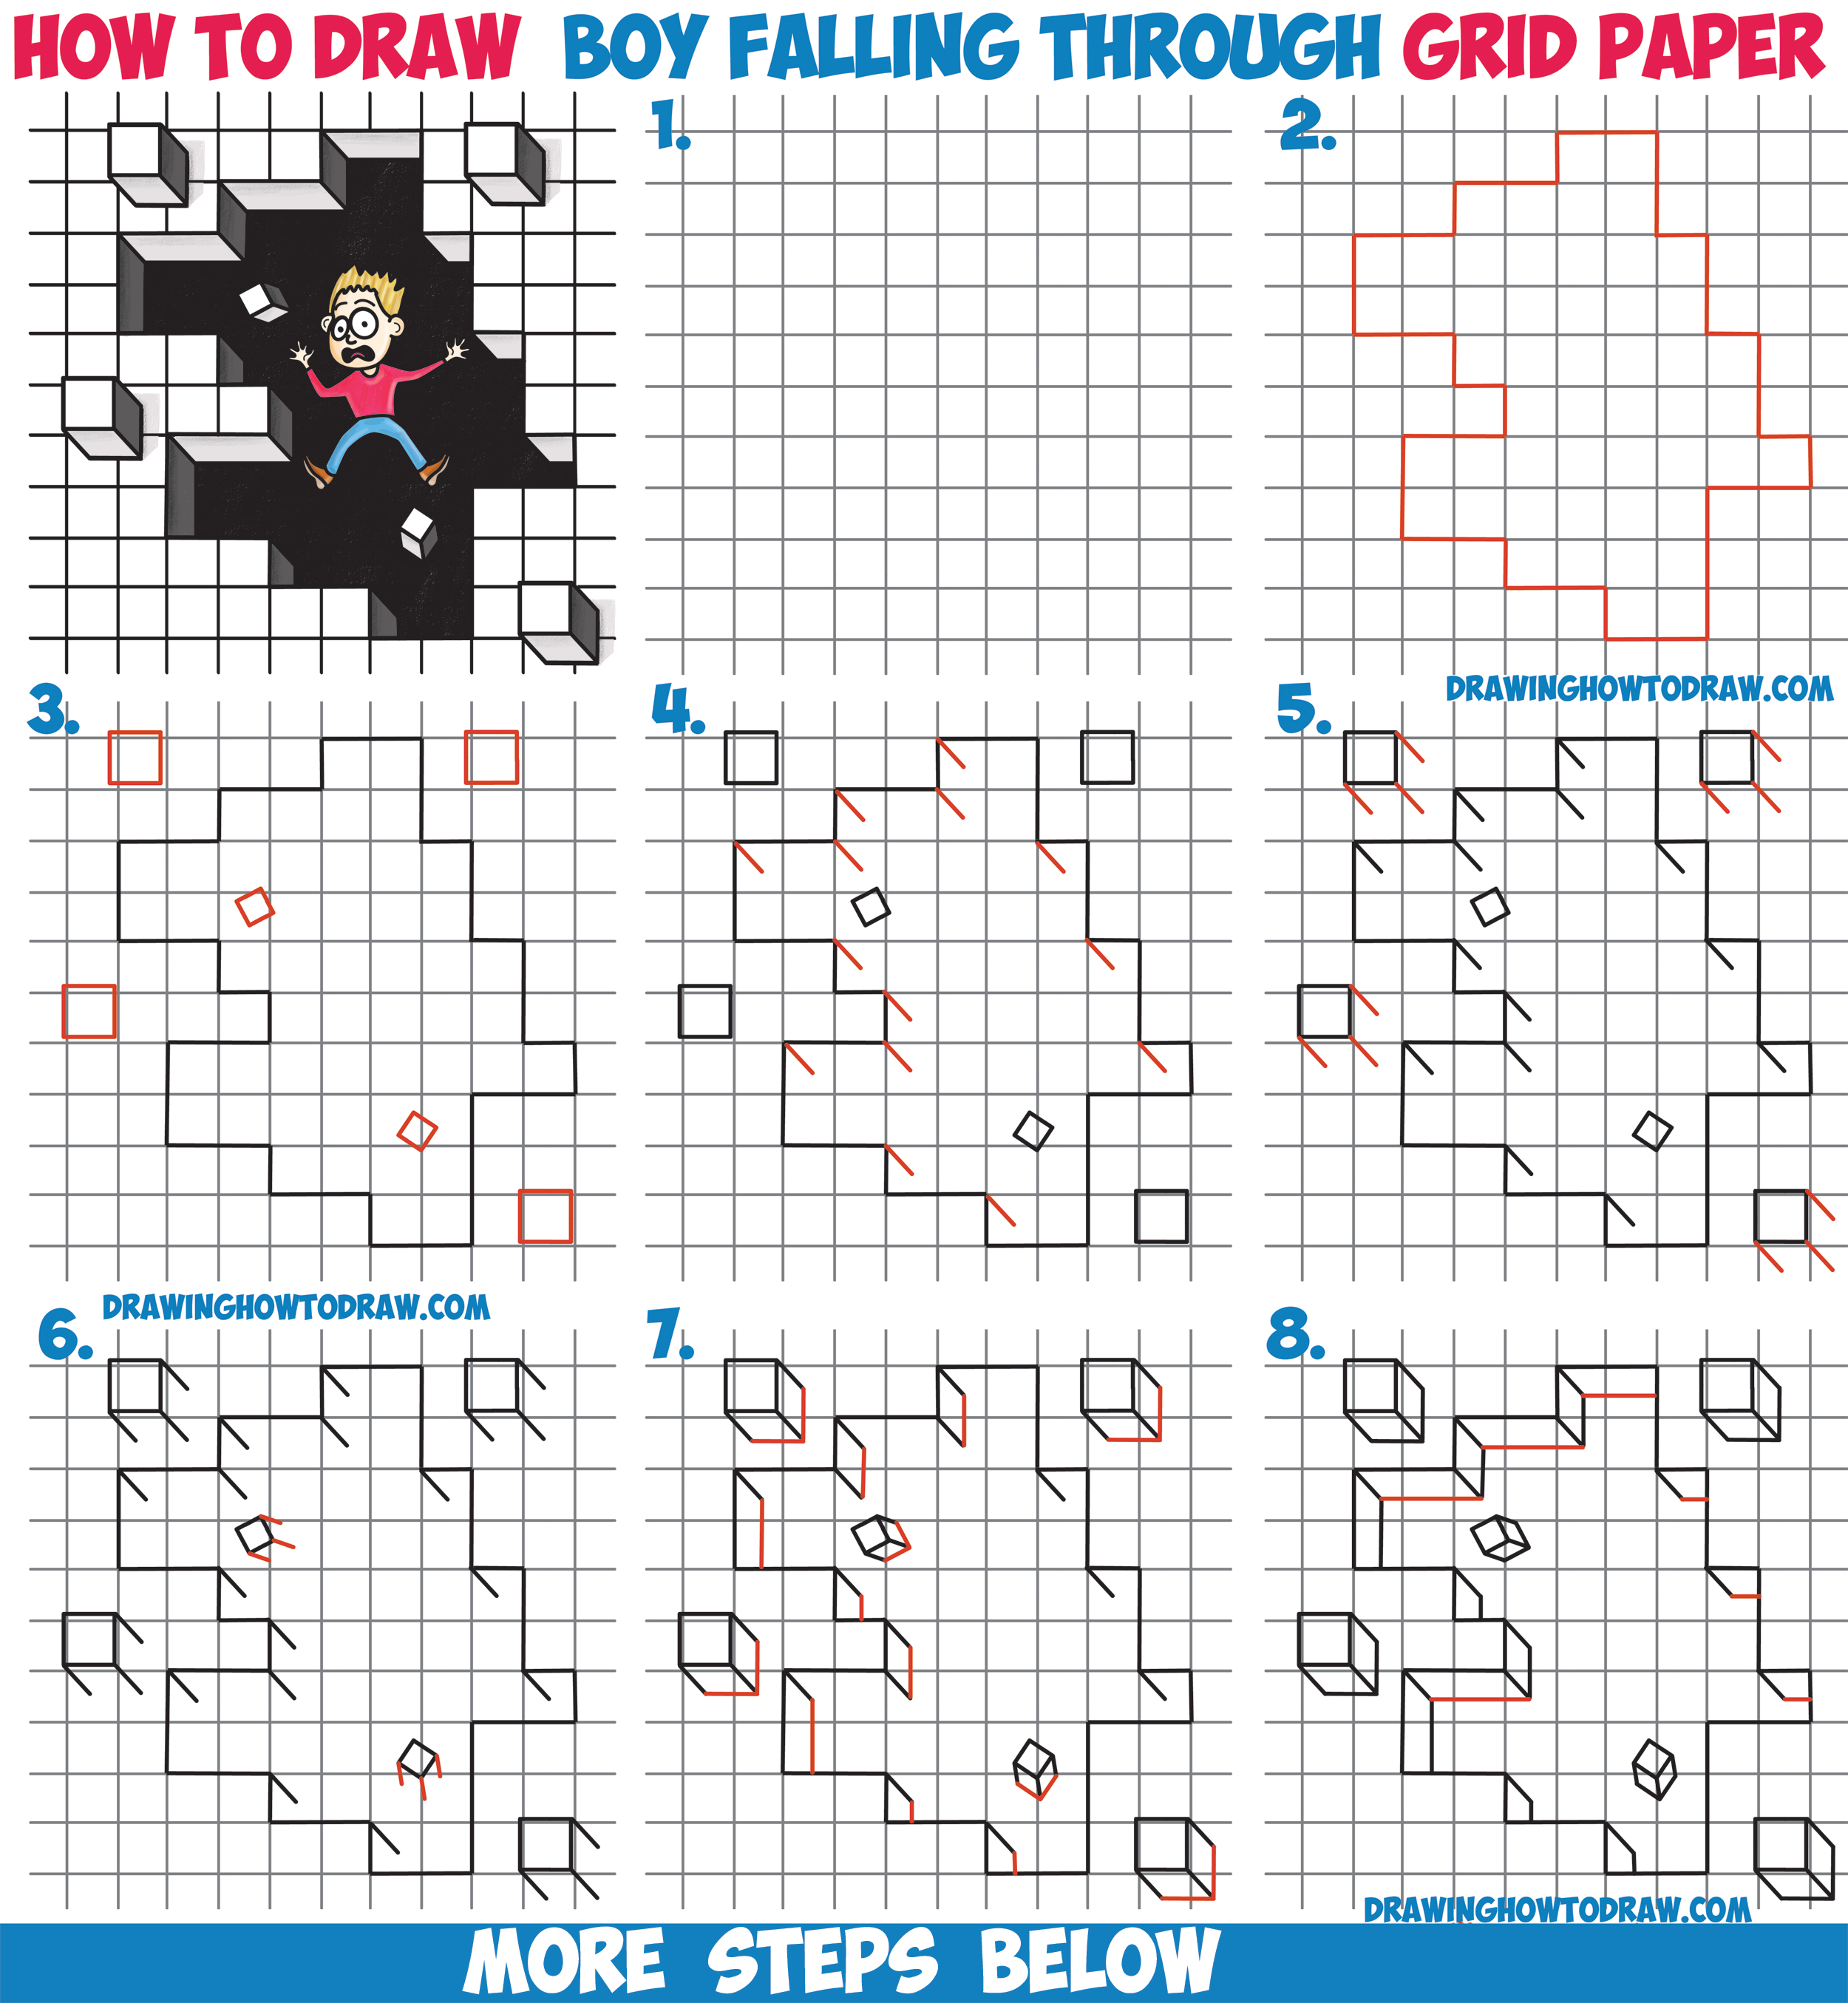 How to Draw Cool Stuff : Draw a Hole in Grid Paper with Cubes Floating Off  and Cartoon Boy Falling Through Easy Step by Step Drawing Tutorial for Kids  - How to